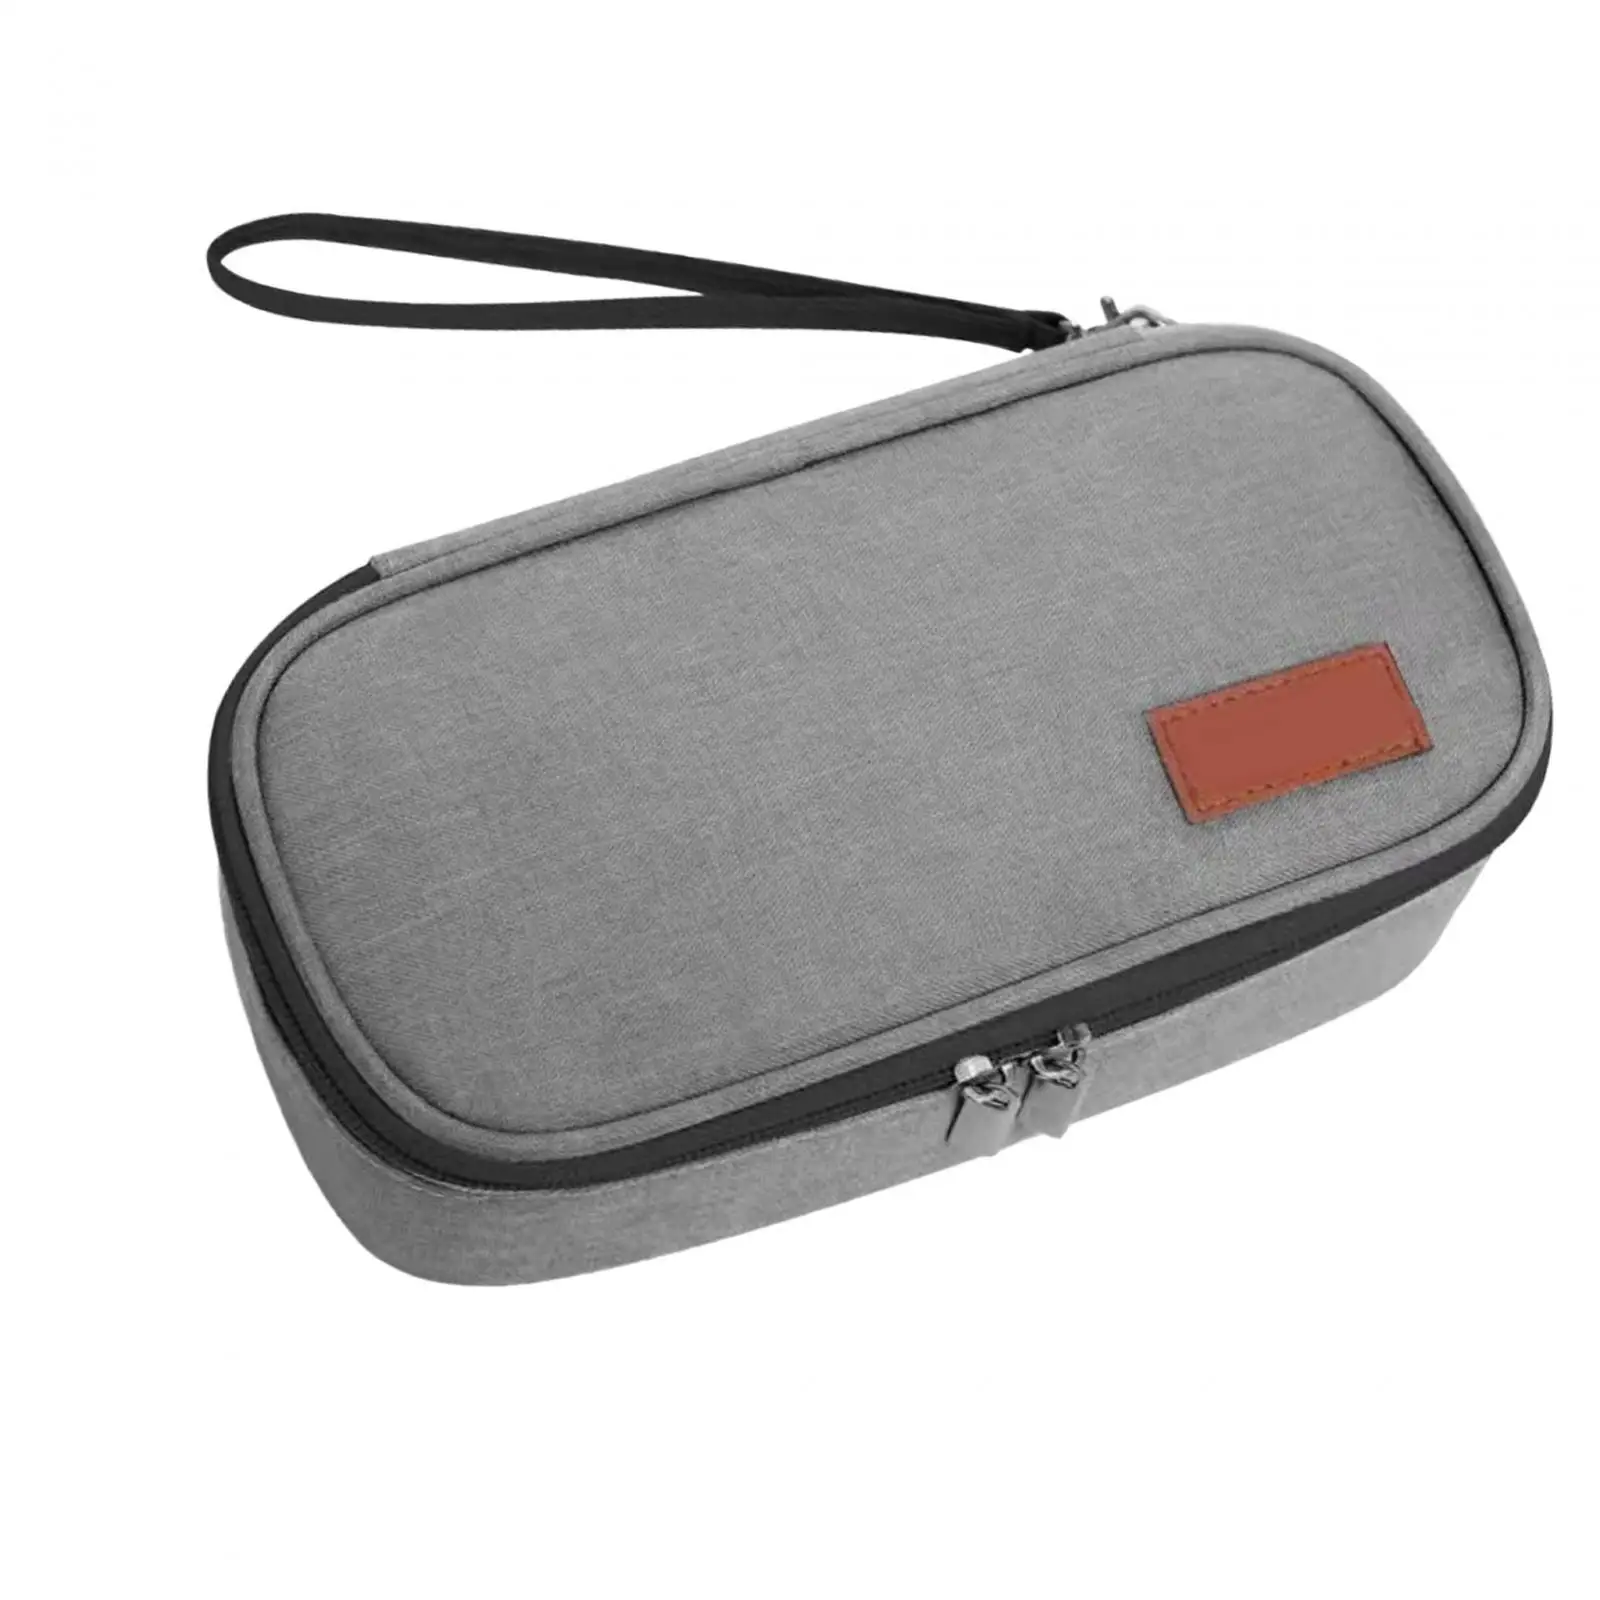 Portable Cooling Bag Oxford Cloth Keep Cool Waterproof Pouch Travel Pill Cooler Case for Home Indoor Office Outdoor